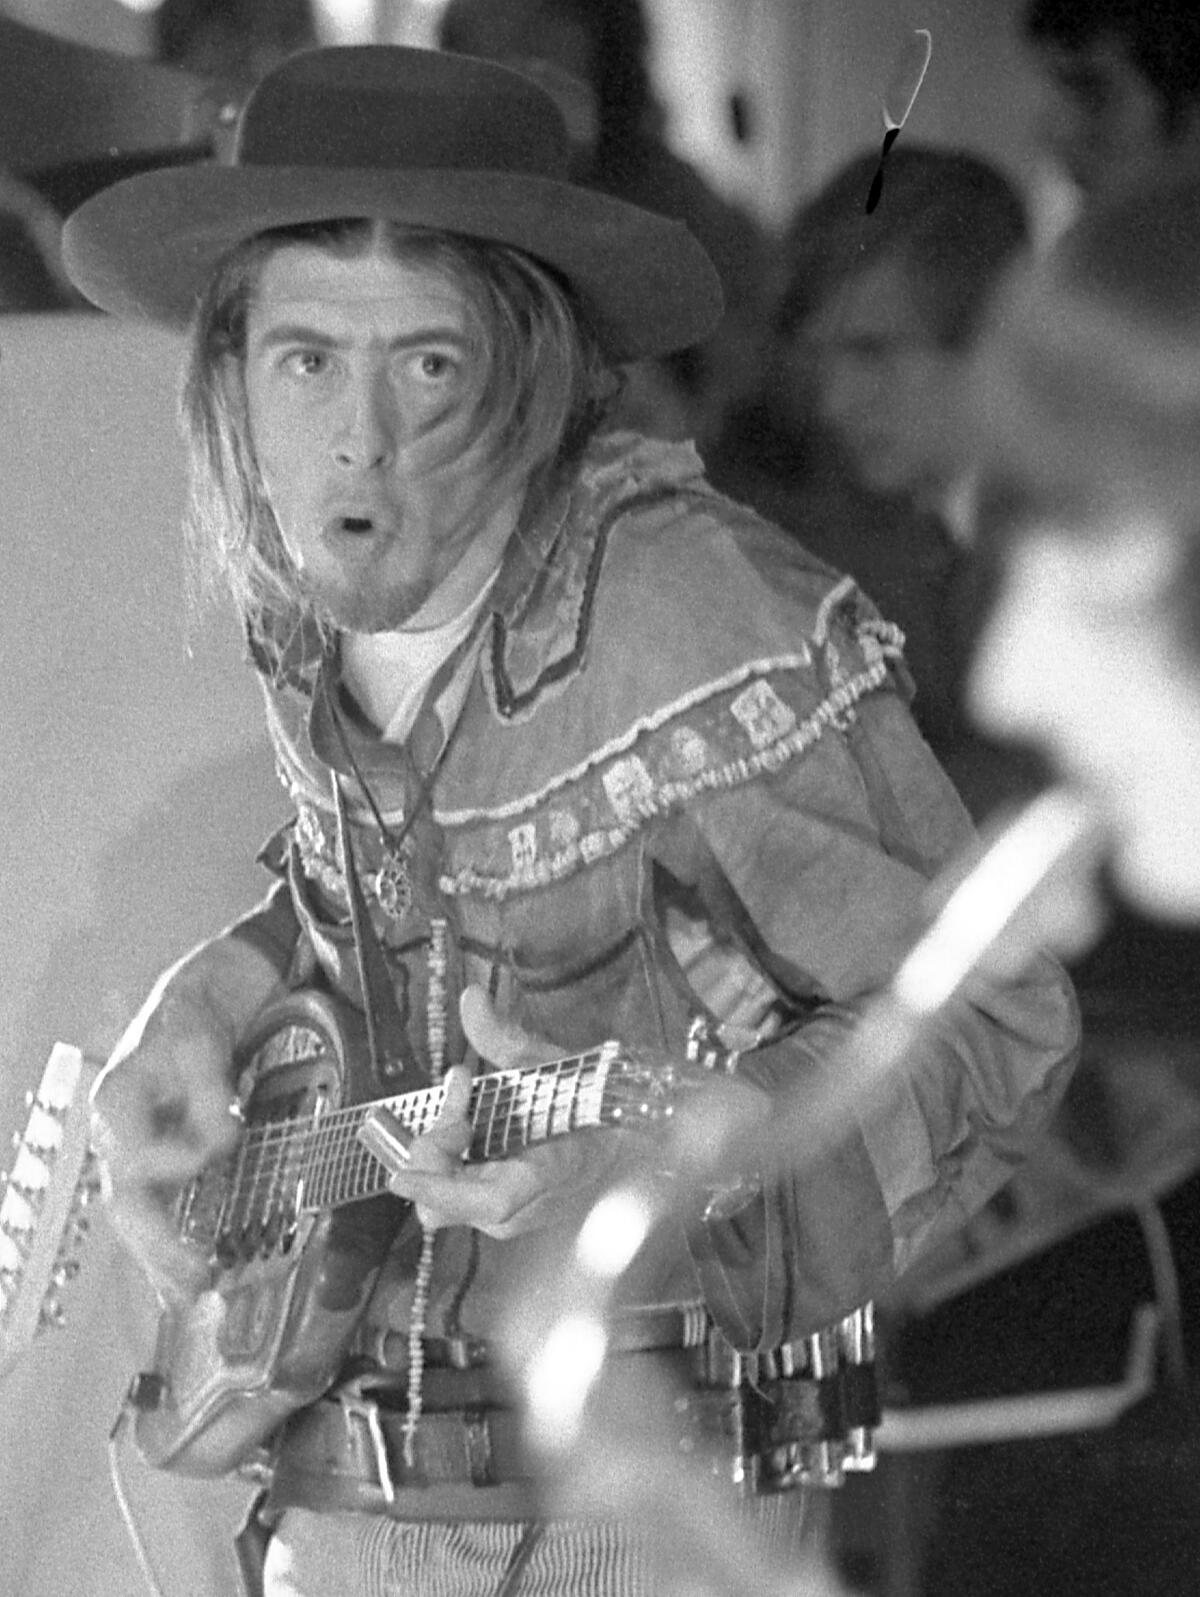 Black and white photo of a man in a cowboy outfit playing guitar